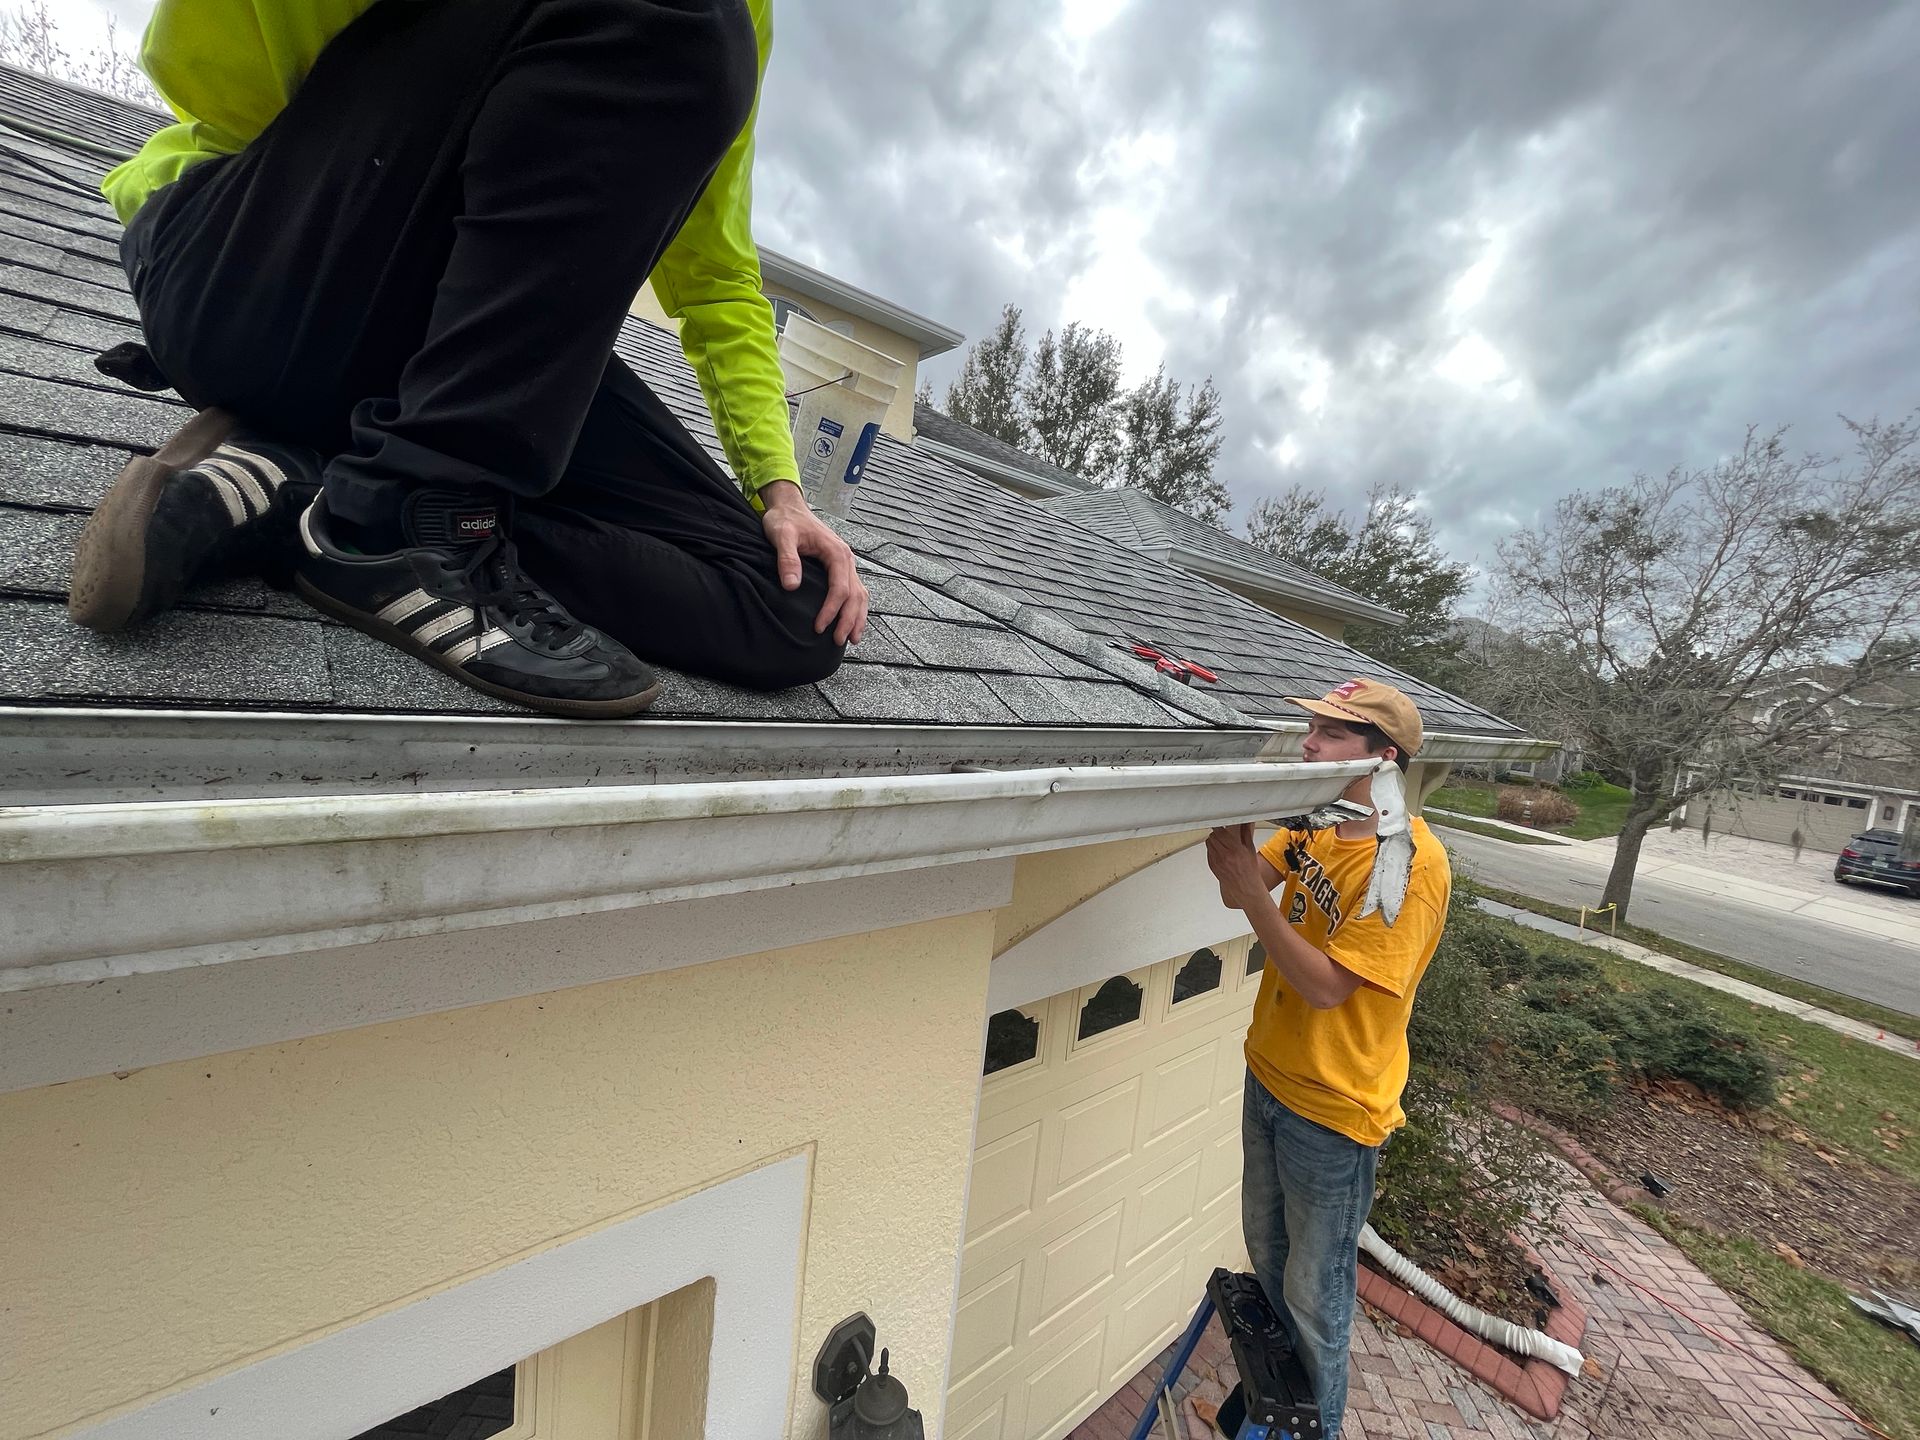 Two men are working on the roof of a house.